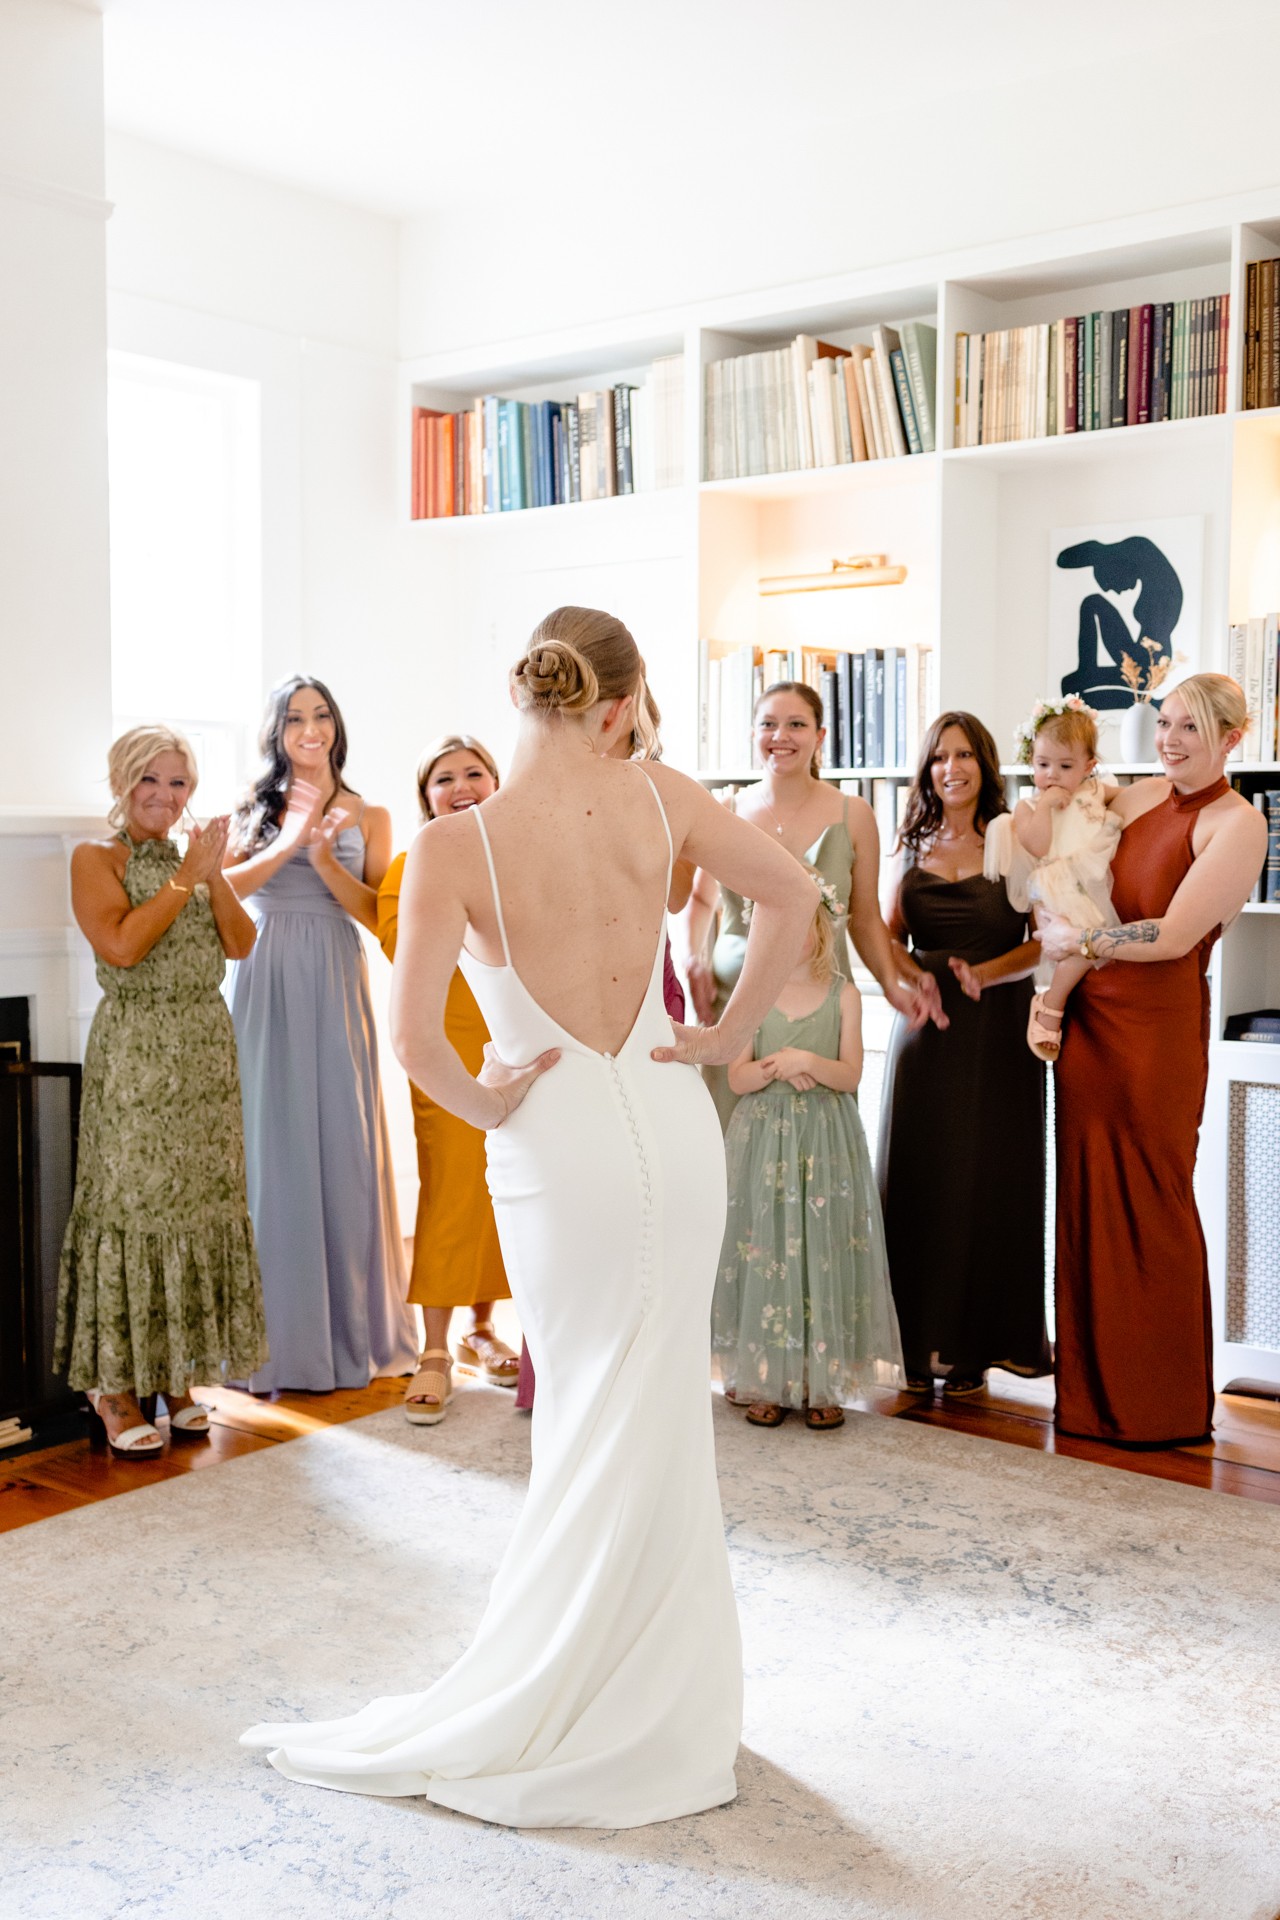 Revealing to the bridesmaids